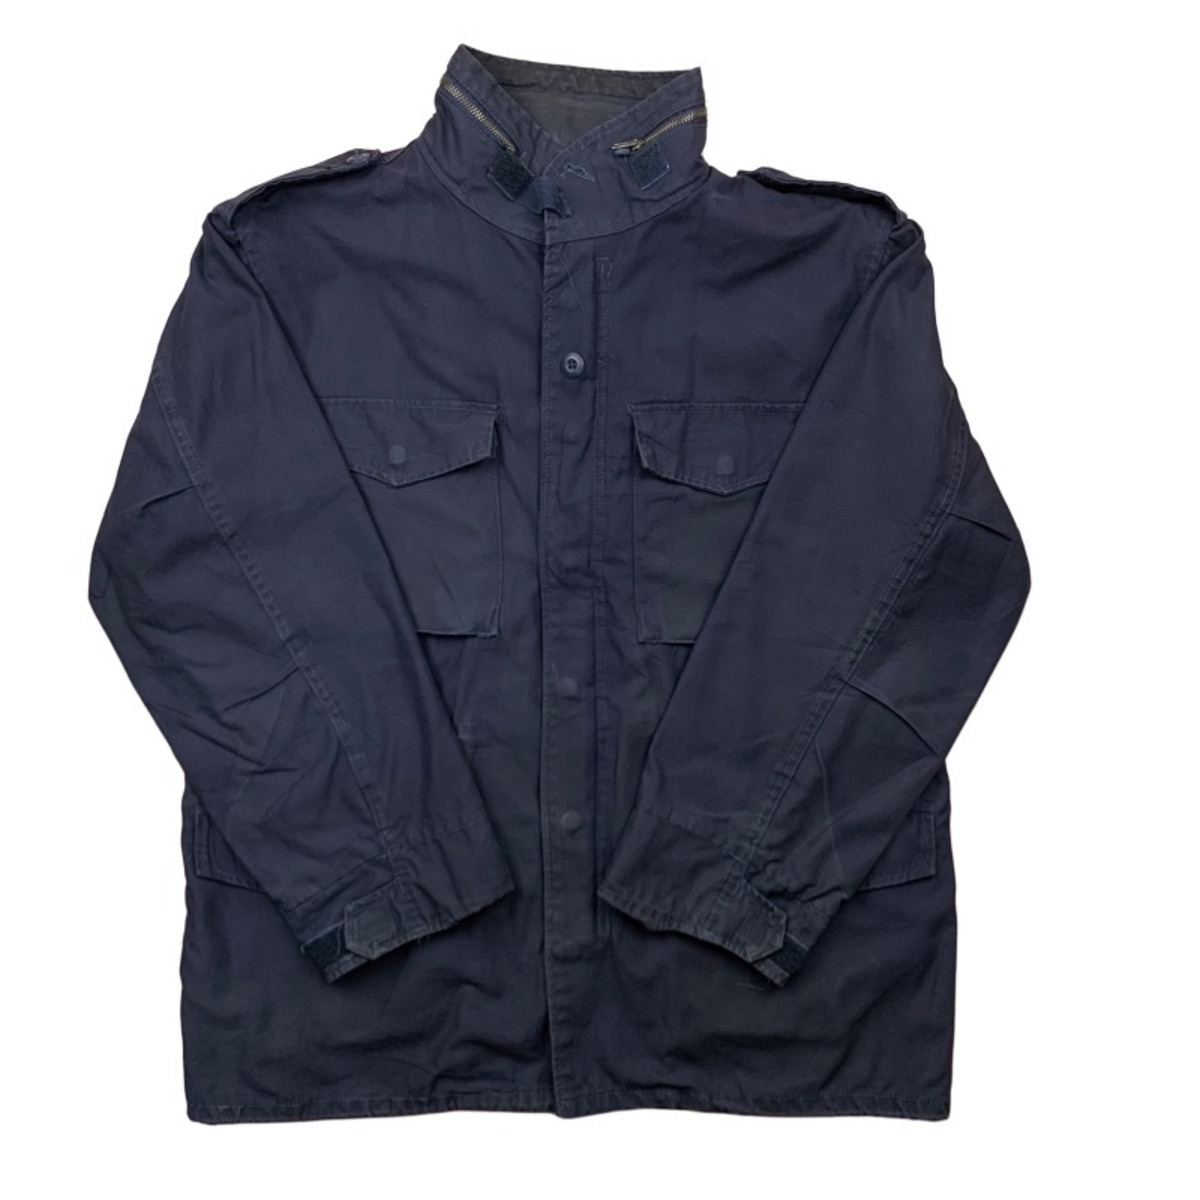 M-65 Field Jacket With Quilting Liner | OOPARTS.